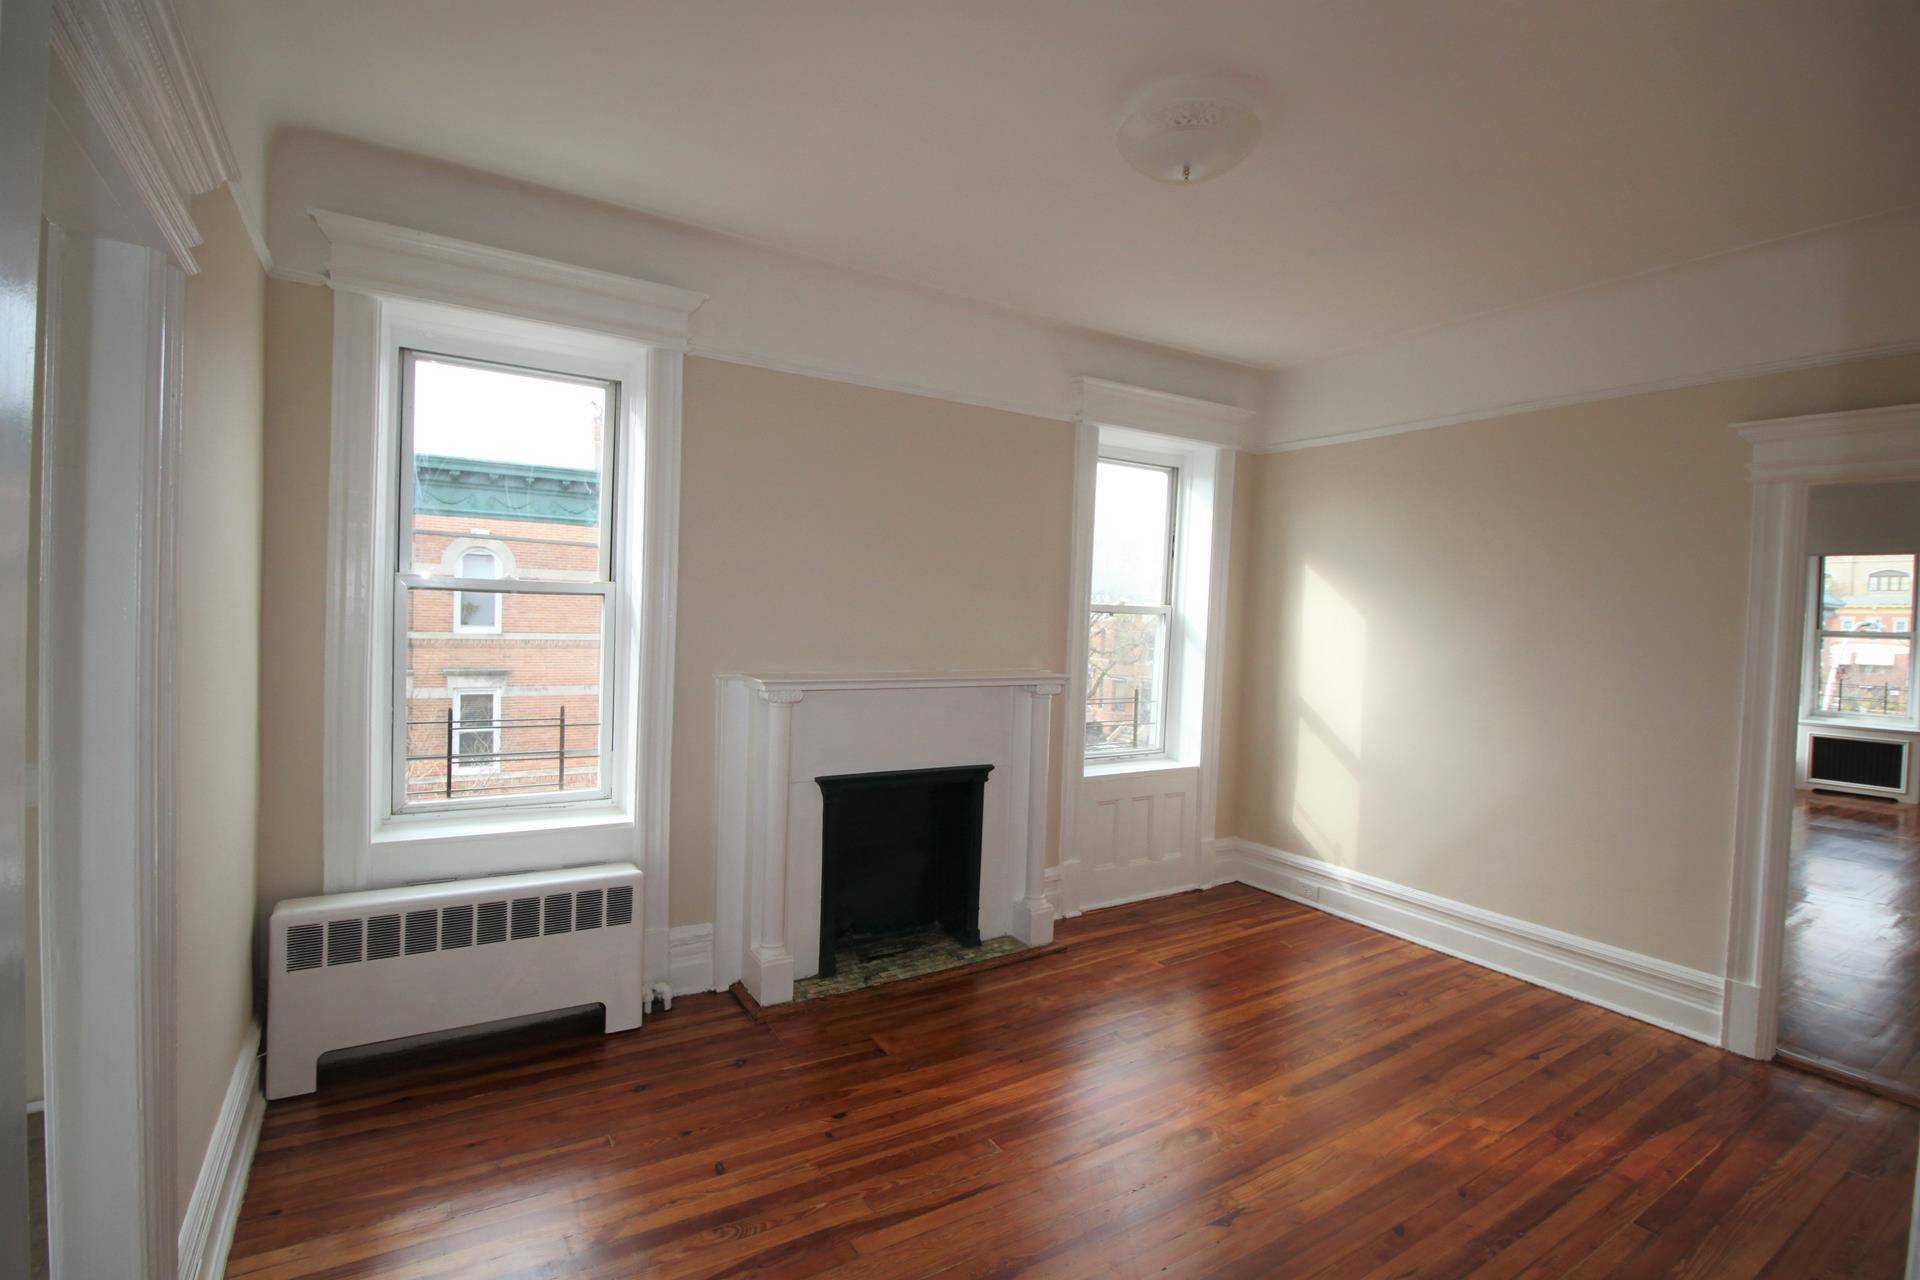 If you are looking for space in a prime location, this apartment won't disappoint you.